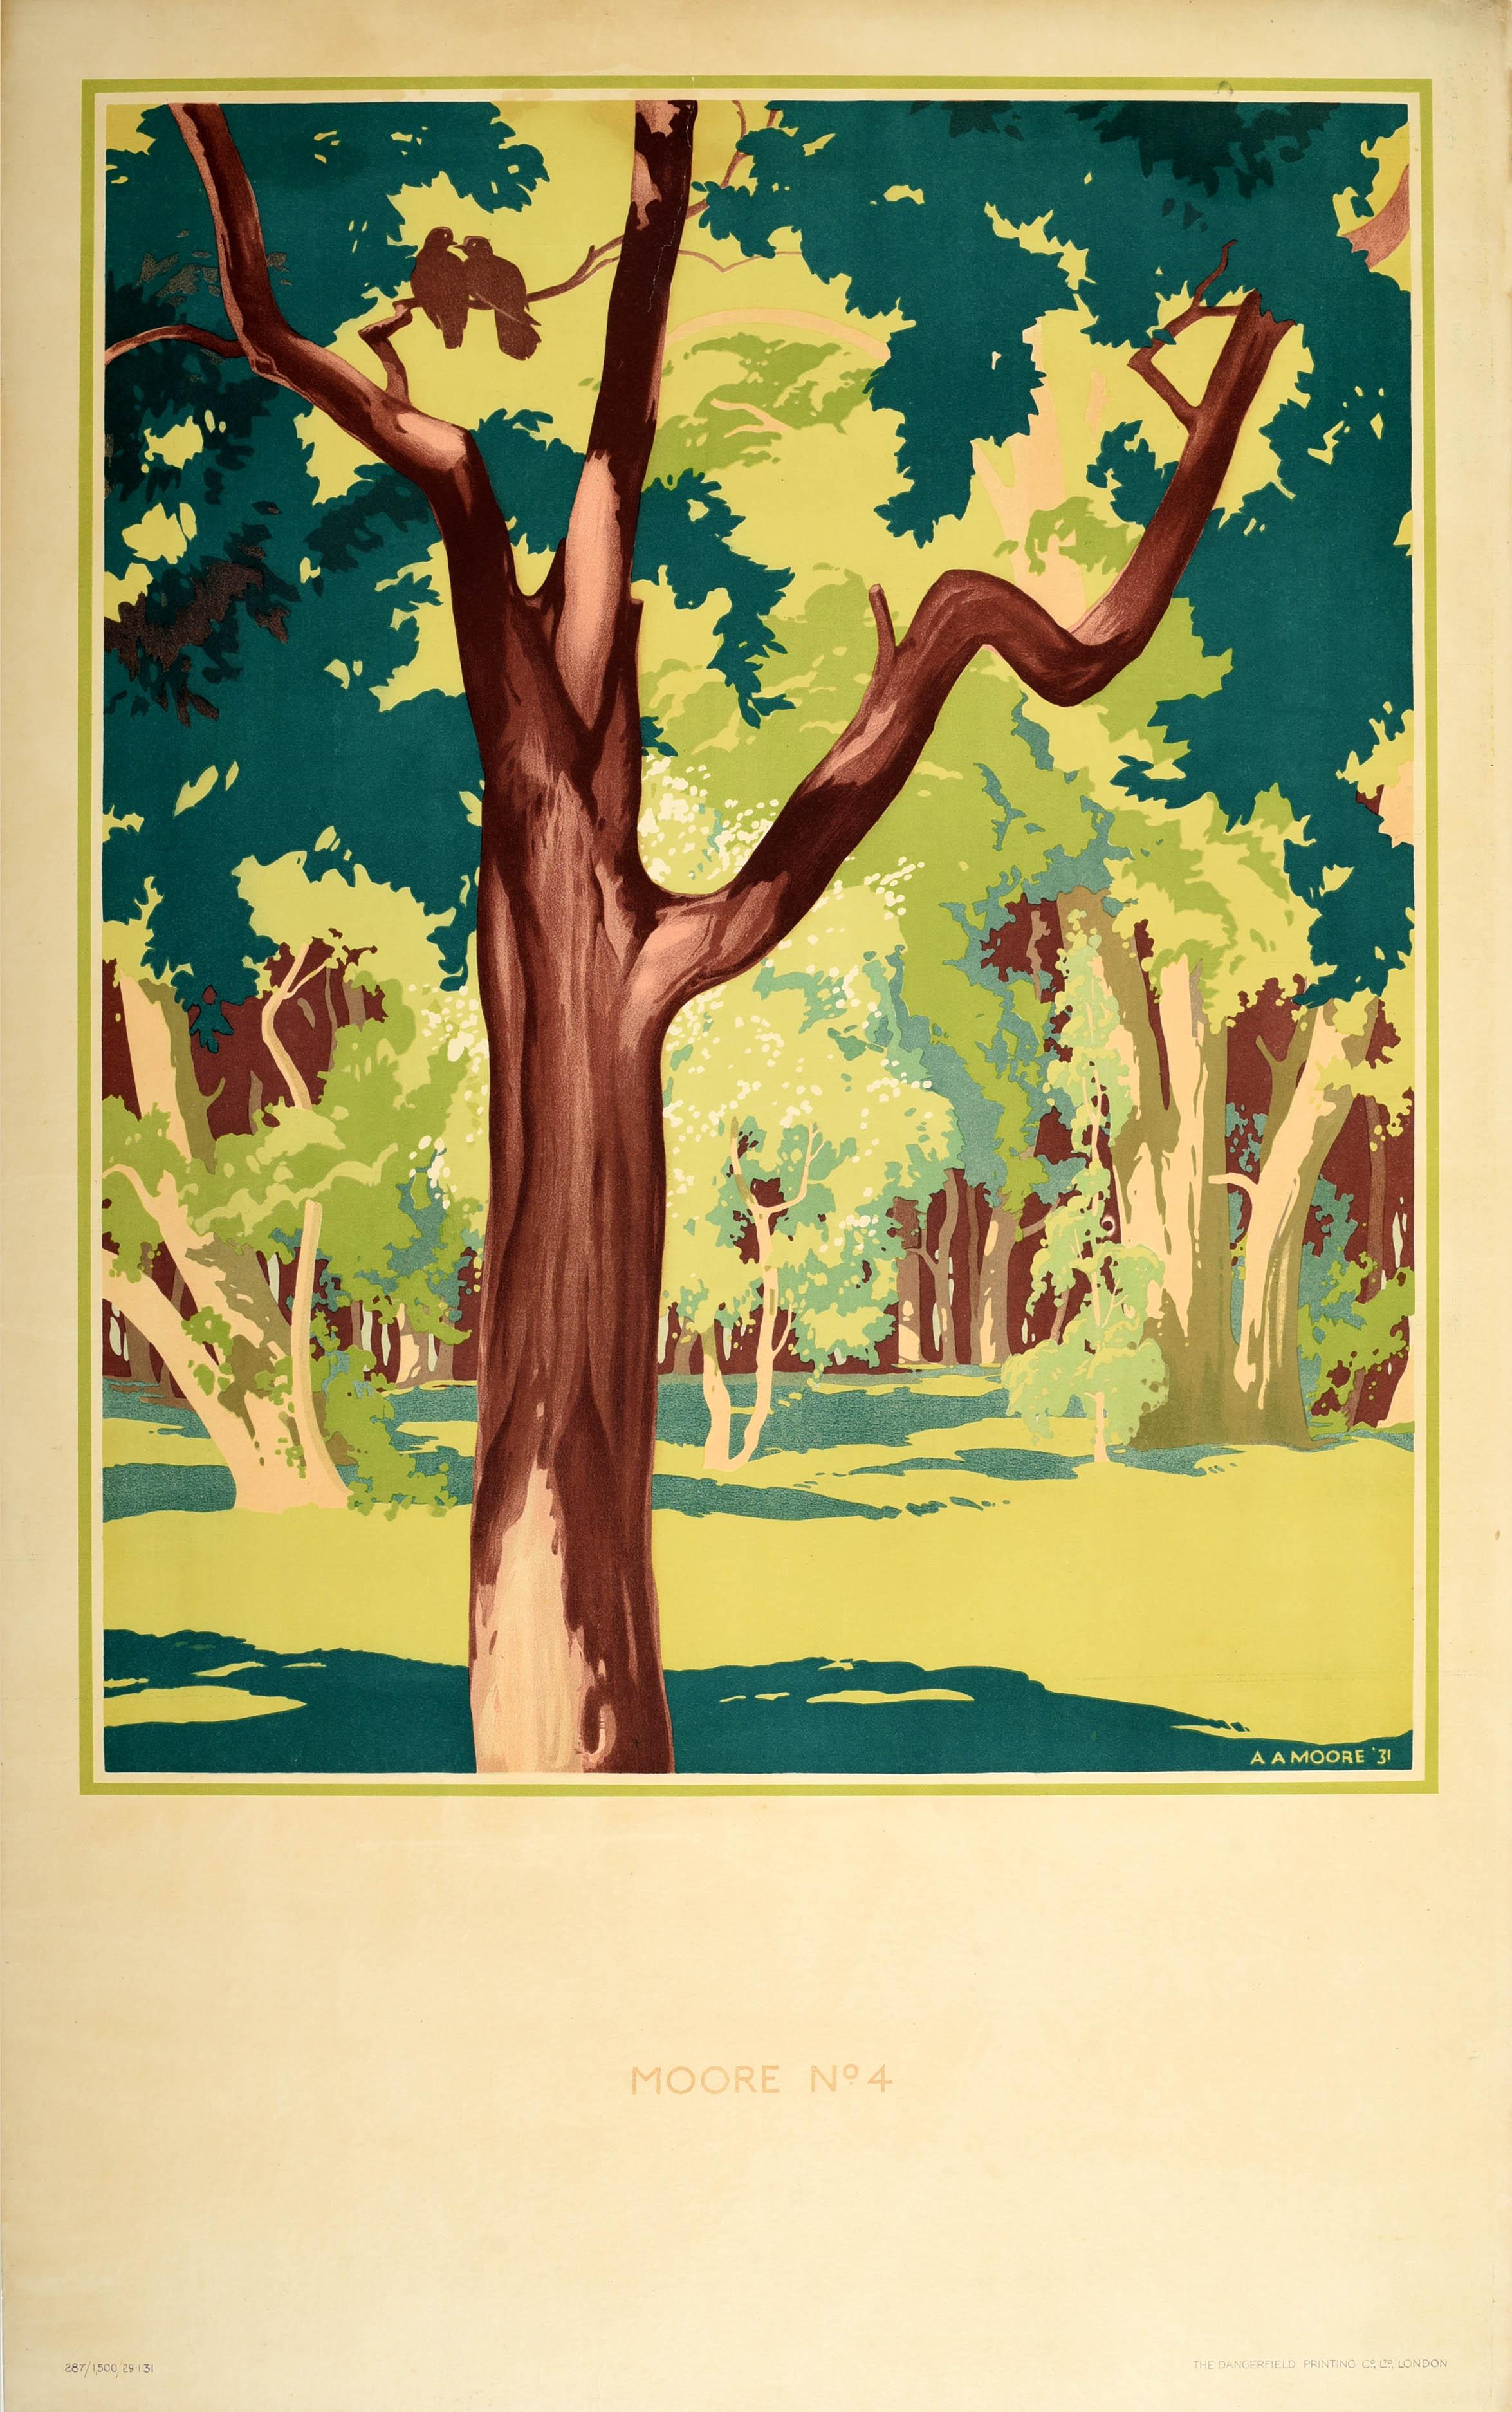 A.A. Moore Print - Original Vintage London Transport Poster Spring Forest Art Countryside Woods